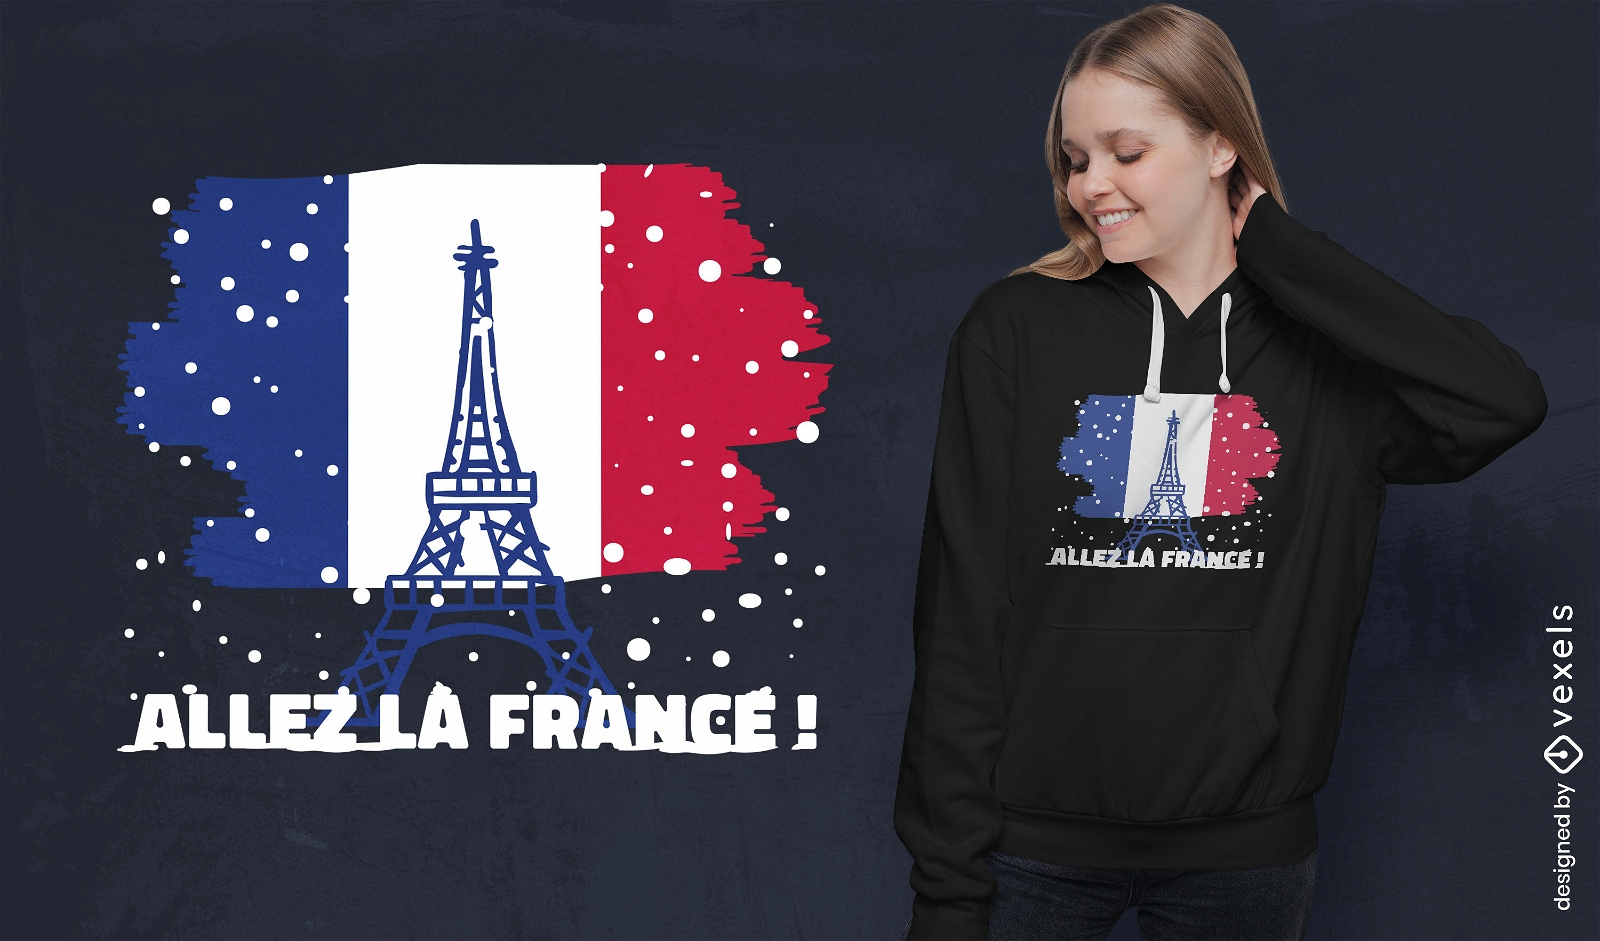 Eiffel Tower and France flag t-shirt design